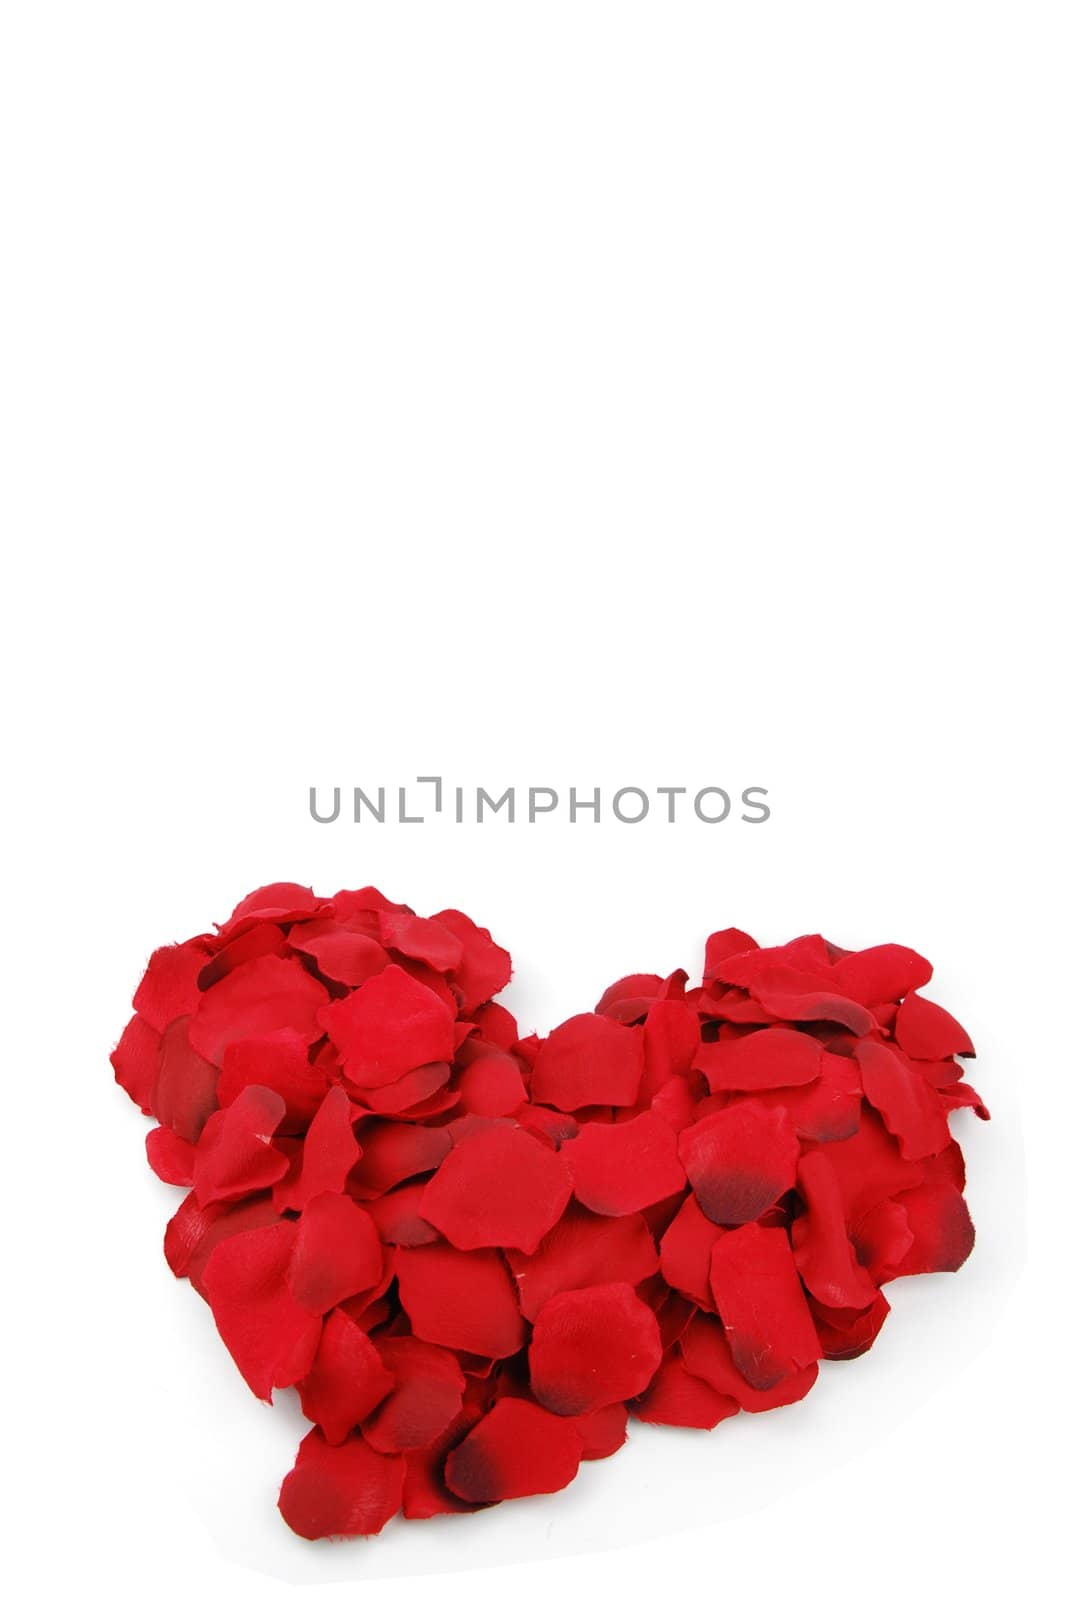 beaufiful red heart made of rose petals (isolated on white background)